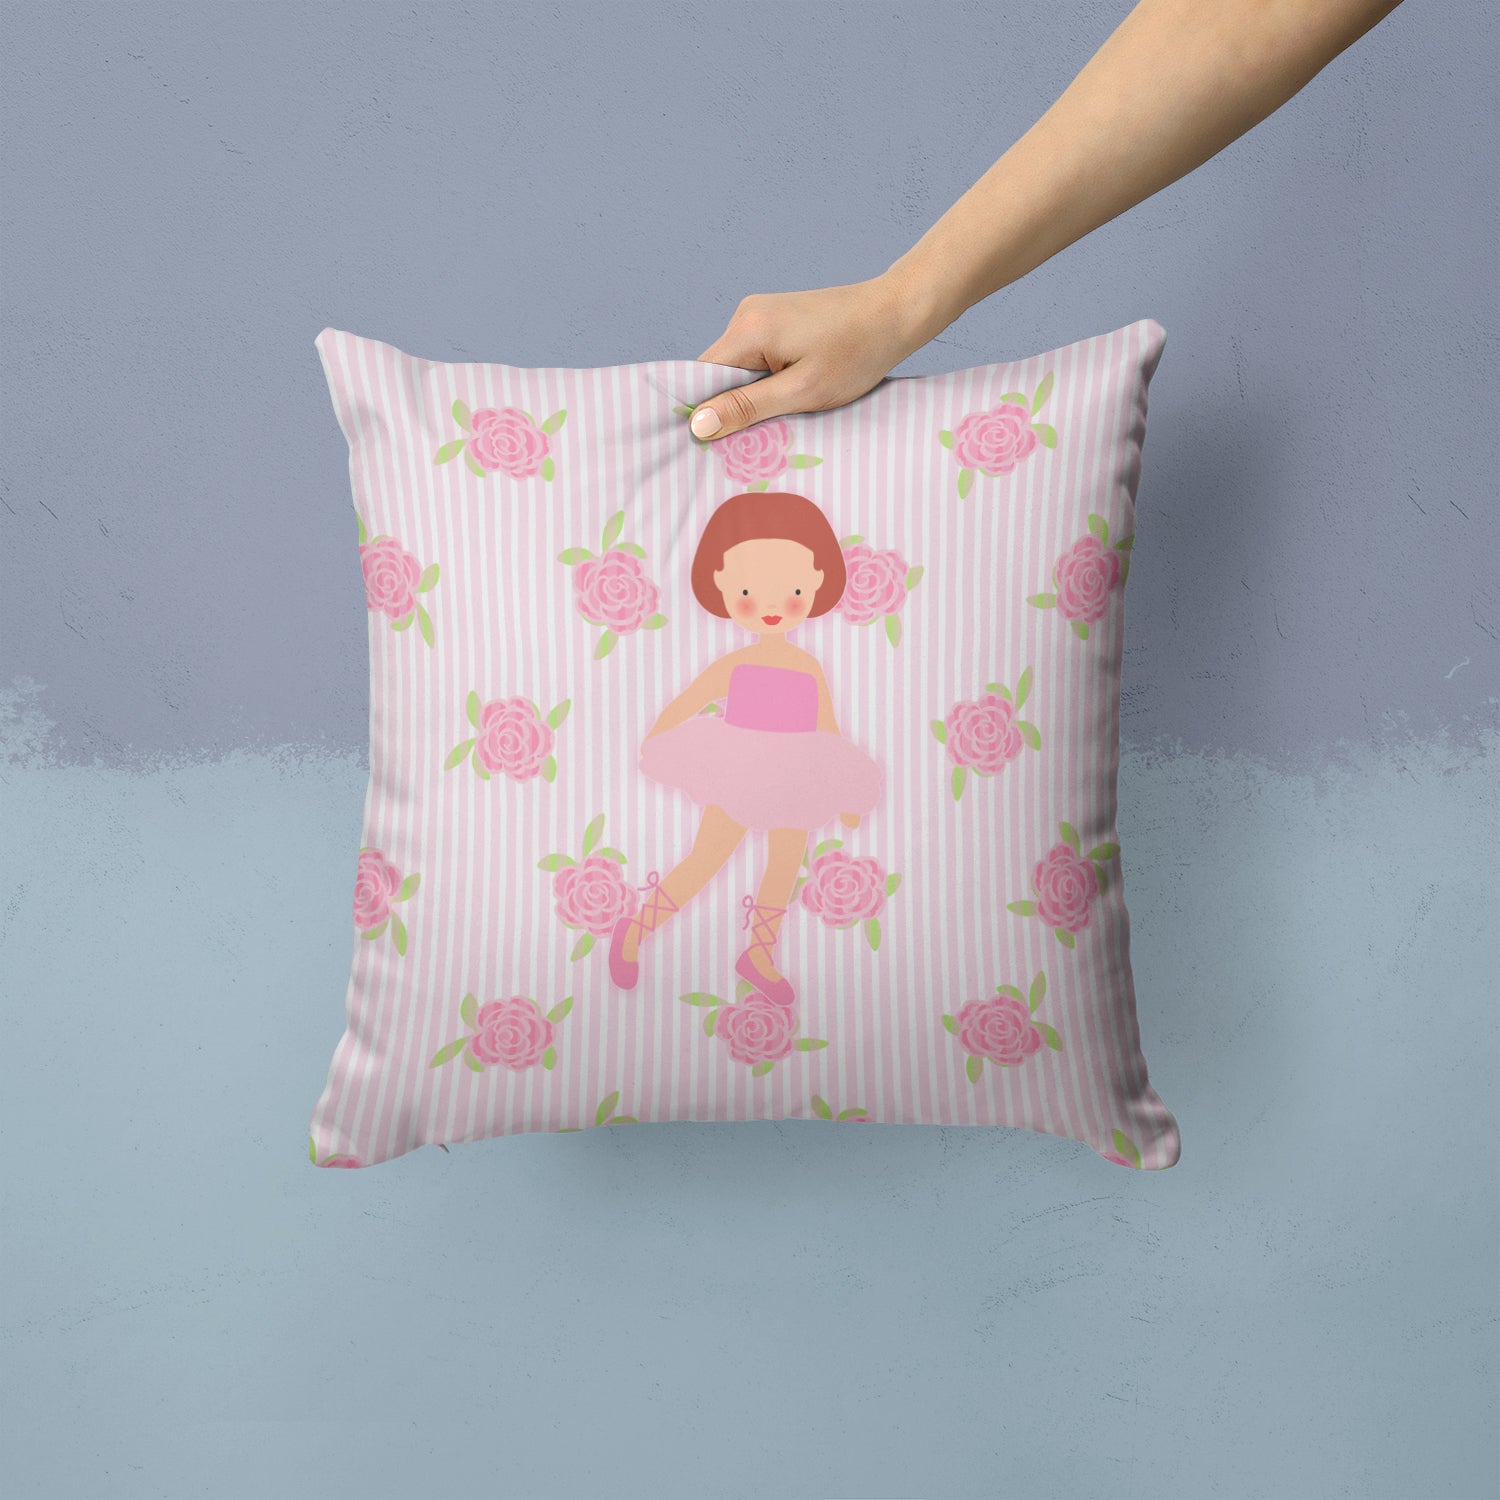 Ballerina Red Short Hair Fabric Decorative Pillow BB5191PW1414 - the-store.com